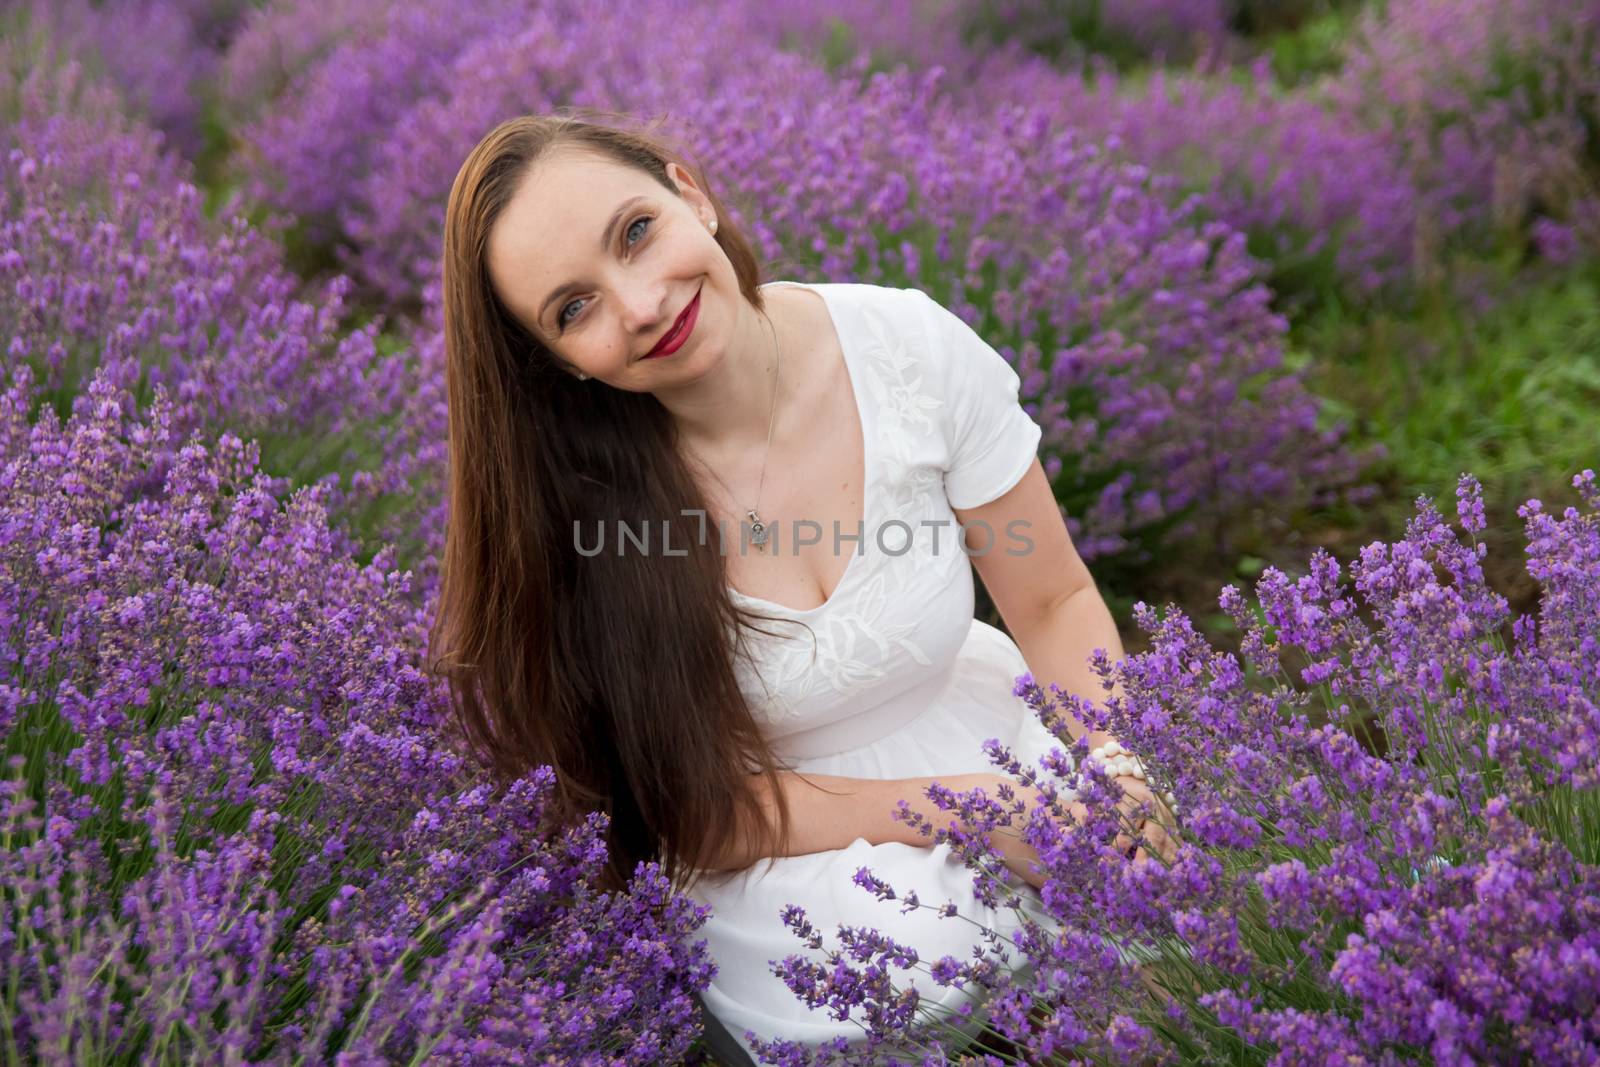 Smiling woman among lavender field blossom